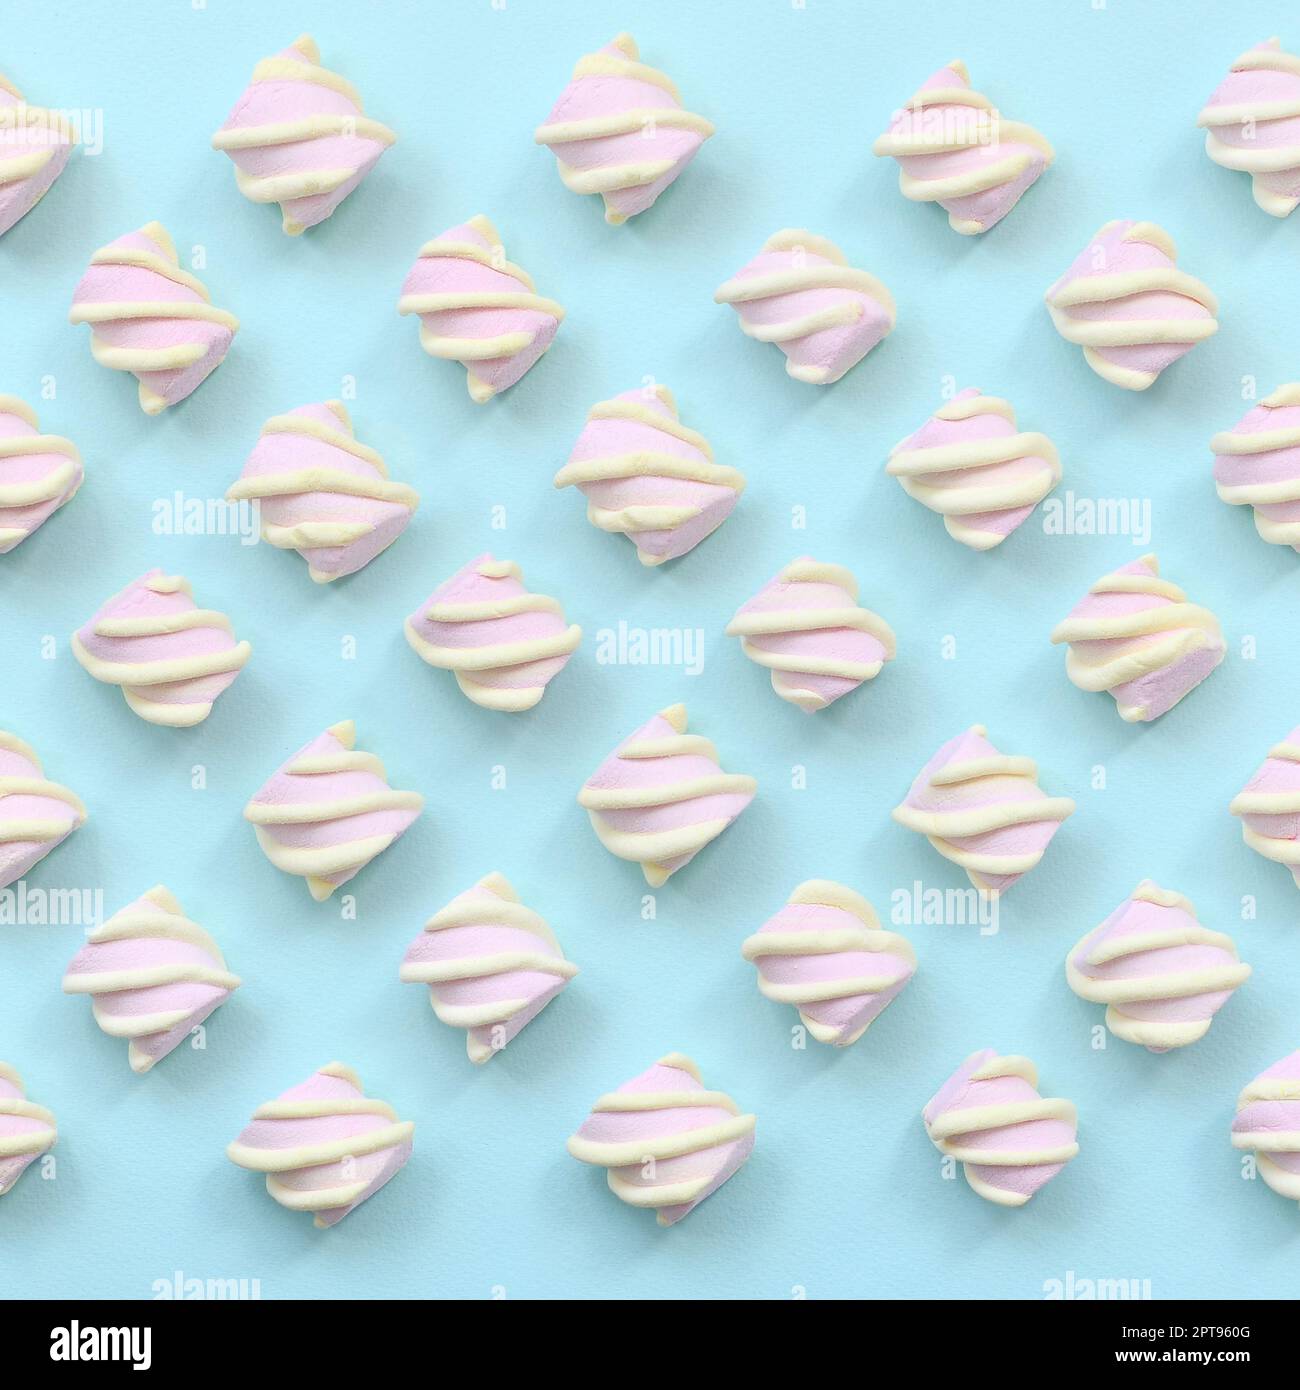 Colorful marshmallow laid out on blue paper background. pastel creative textured pattern. minimal. Stock Photo